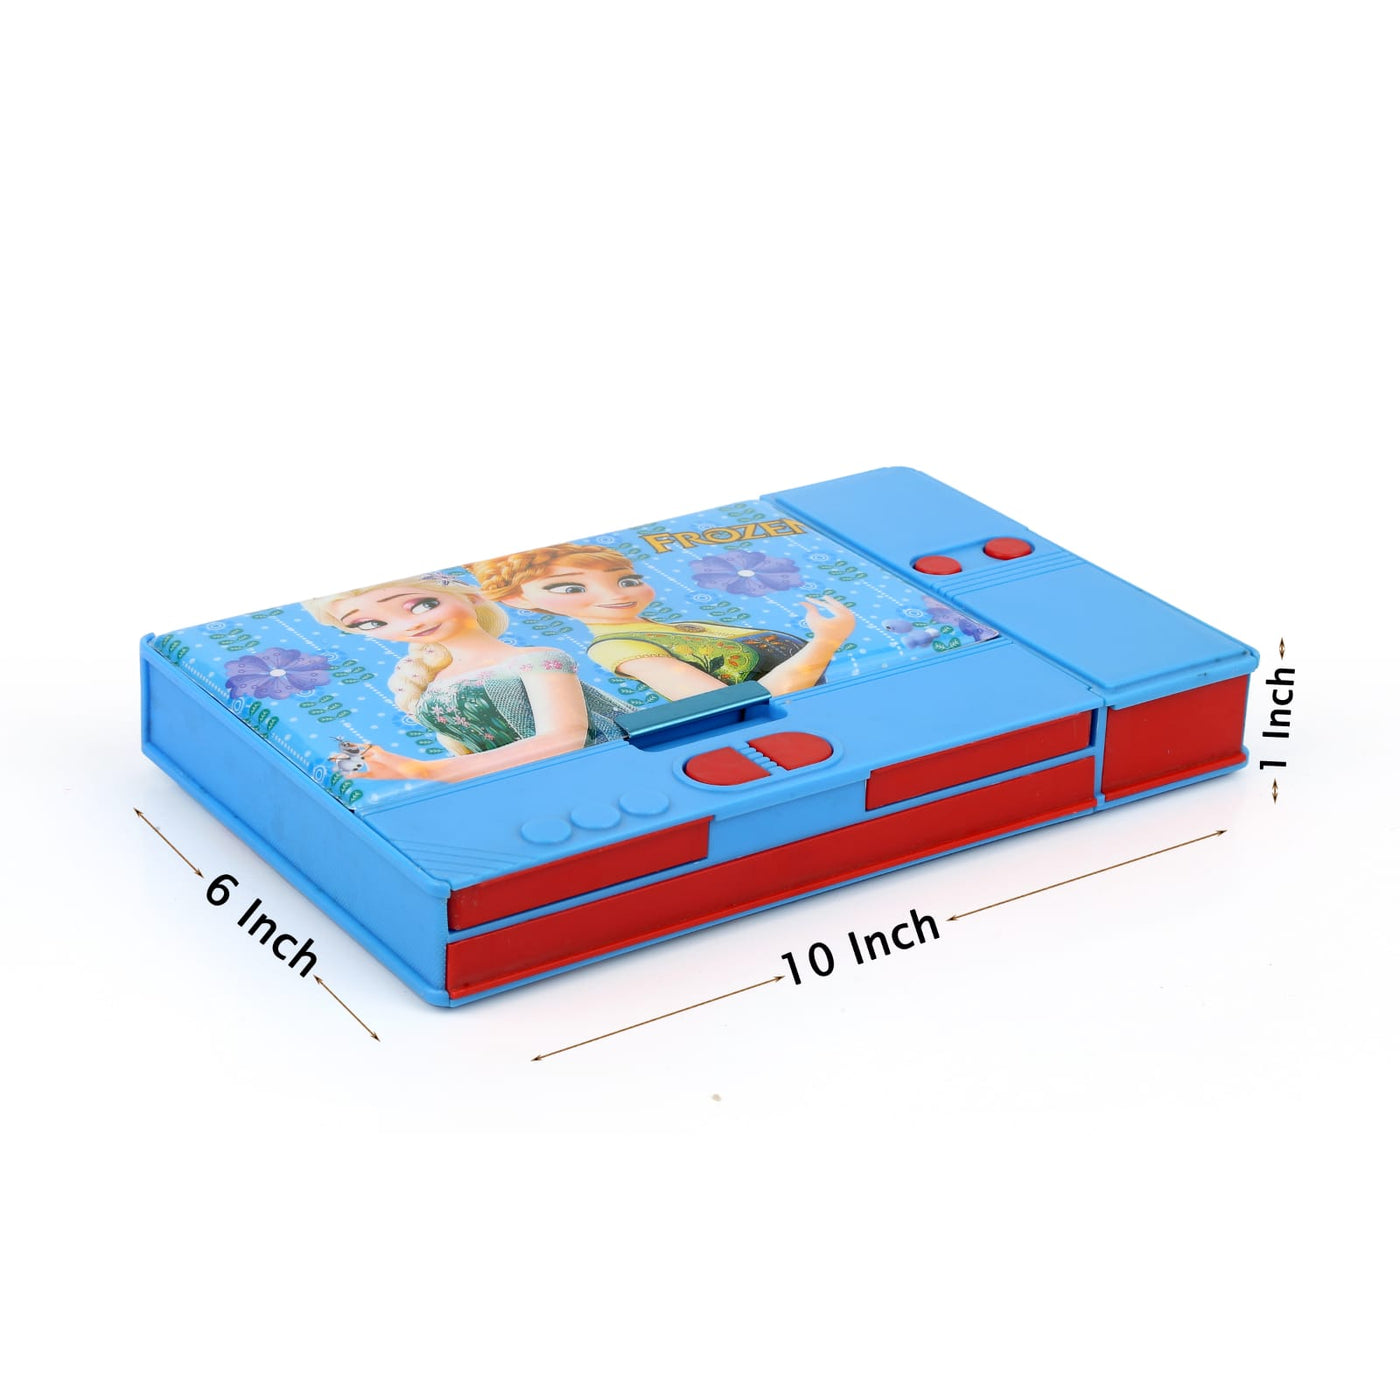 Pencil Box Big Size With Lots Off Options